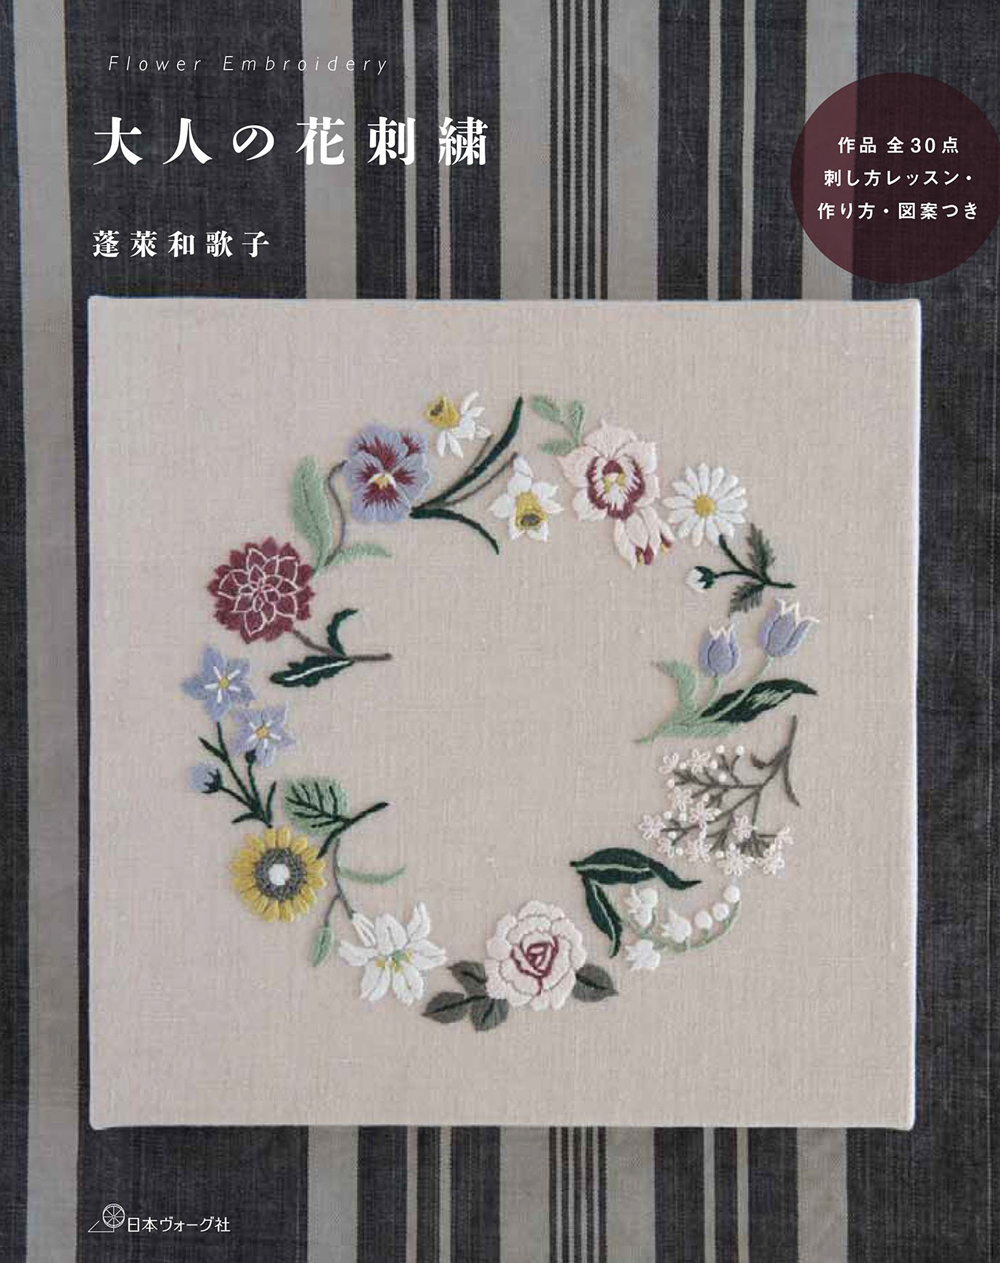 Adult flower embroidery